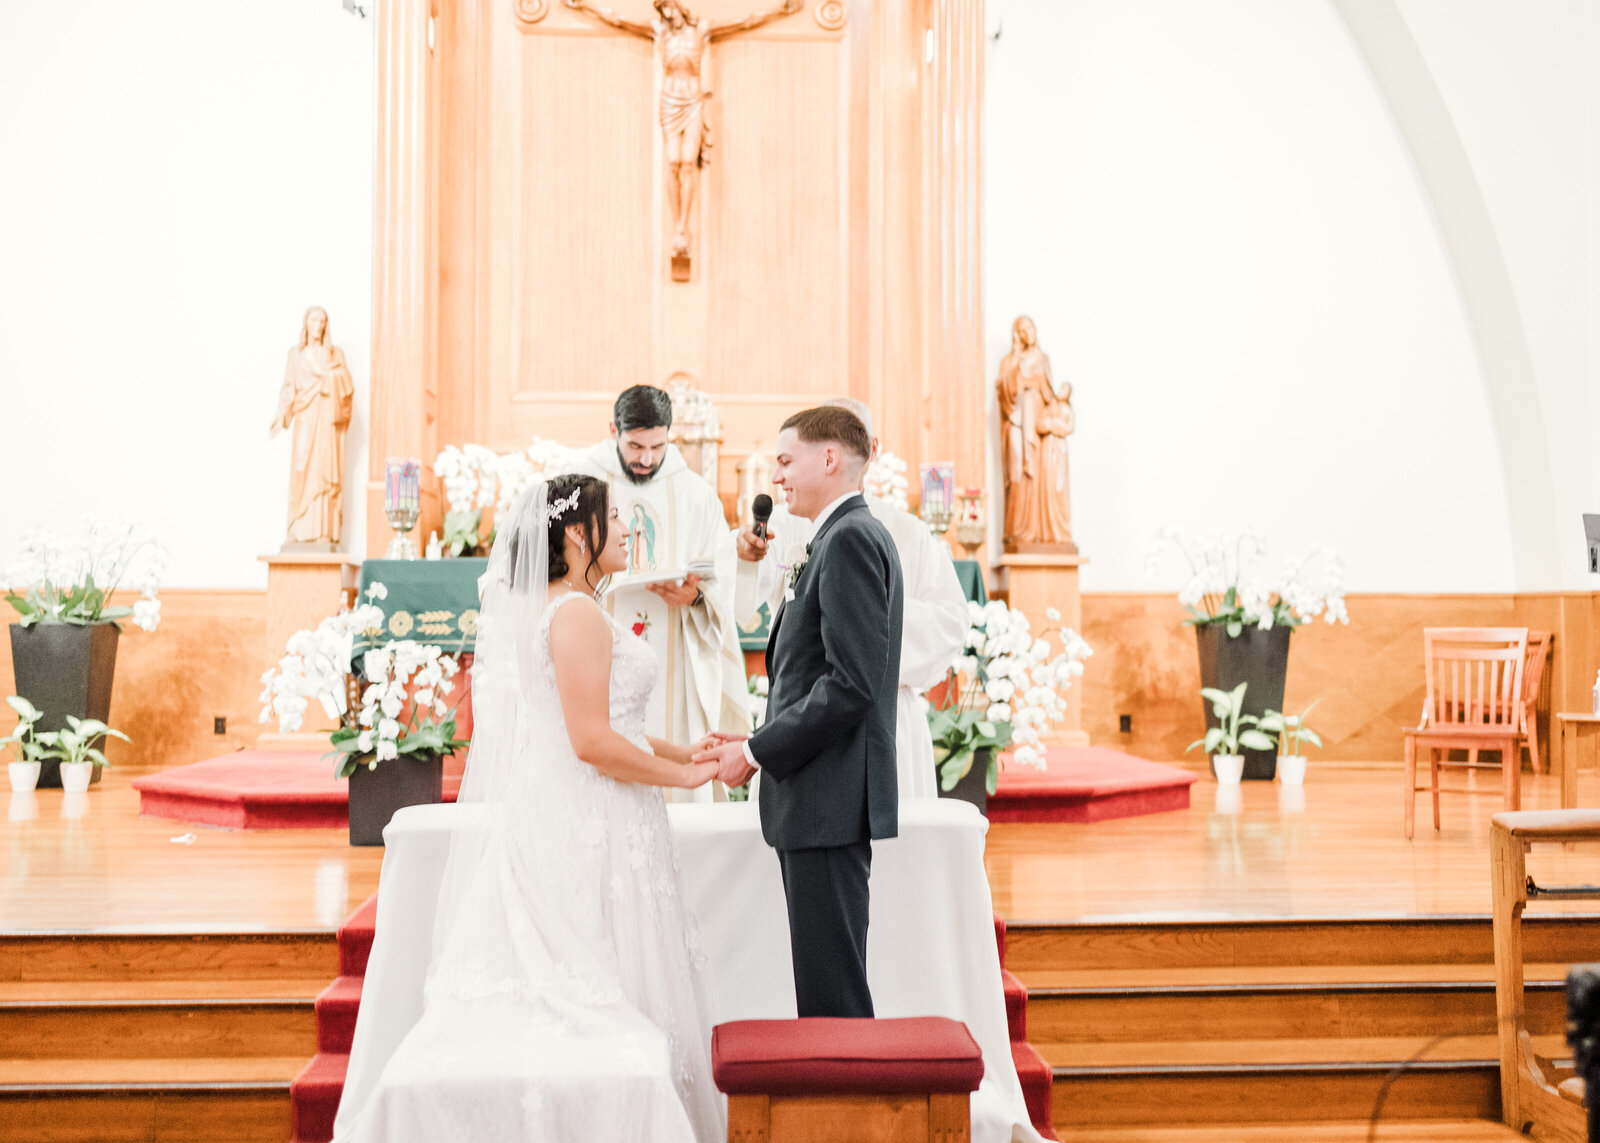 Bride and Grrom exchanging vows at Saint Anne's Catholic Church in Santa Ana